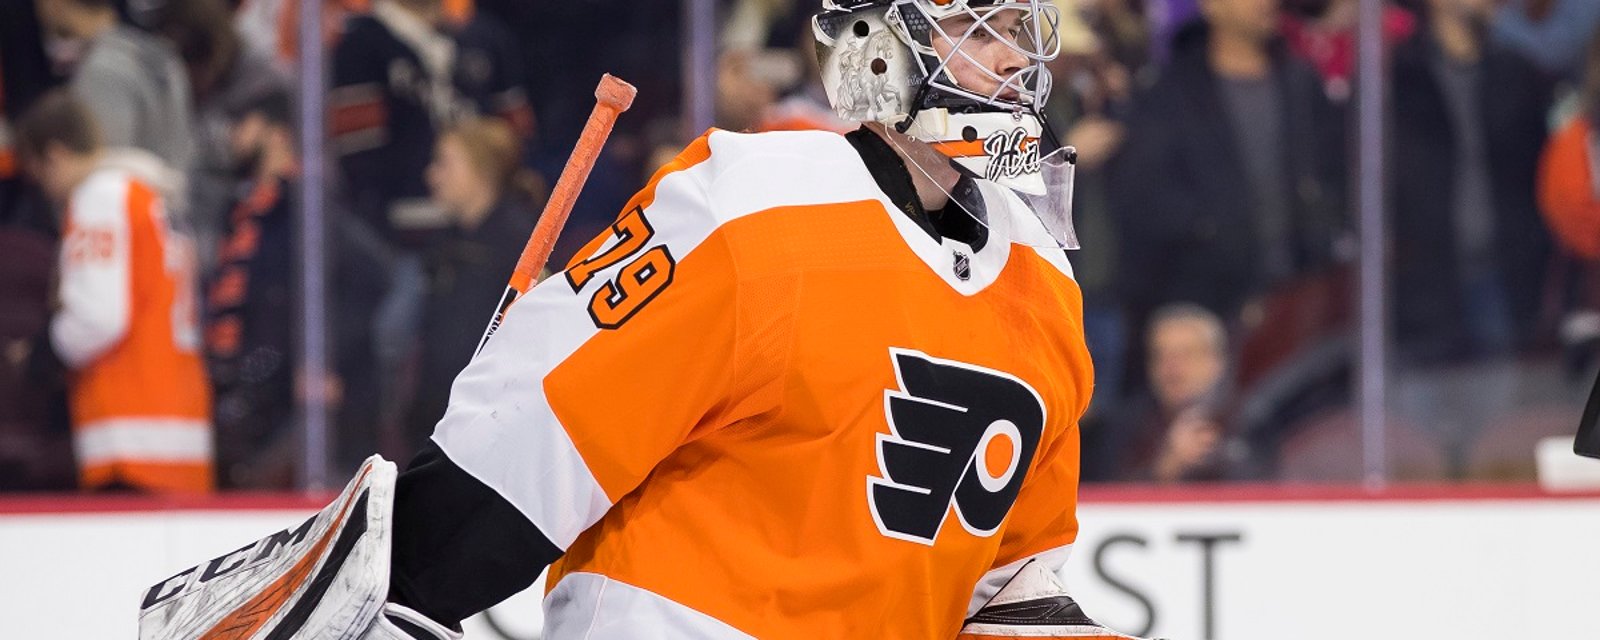 Carter Hart has been benched by the Flyers.